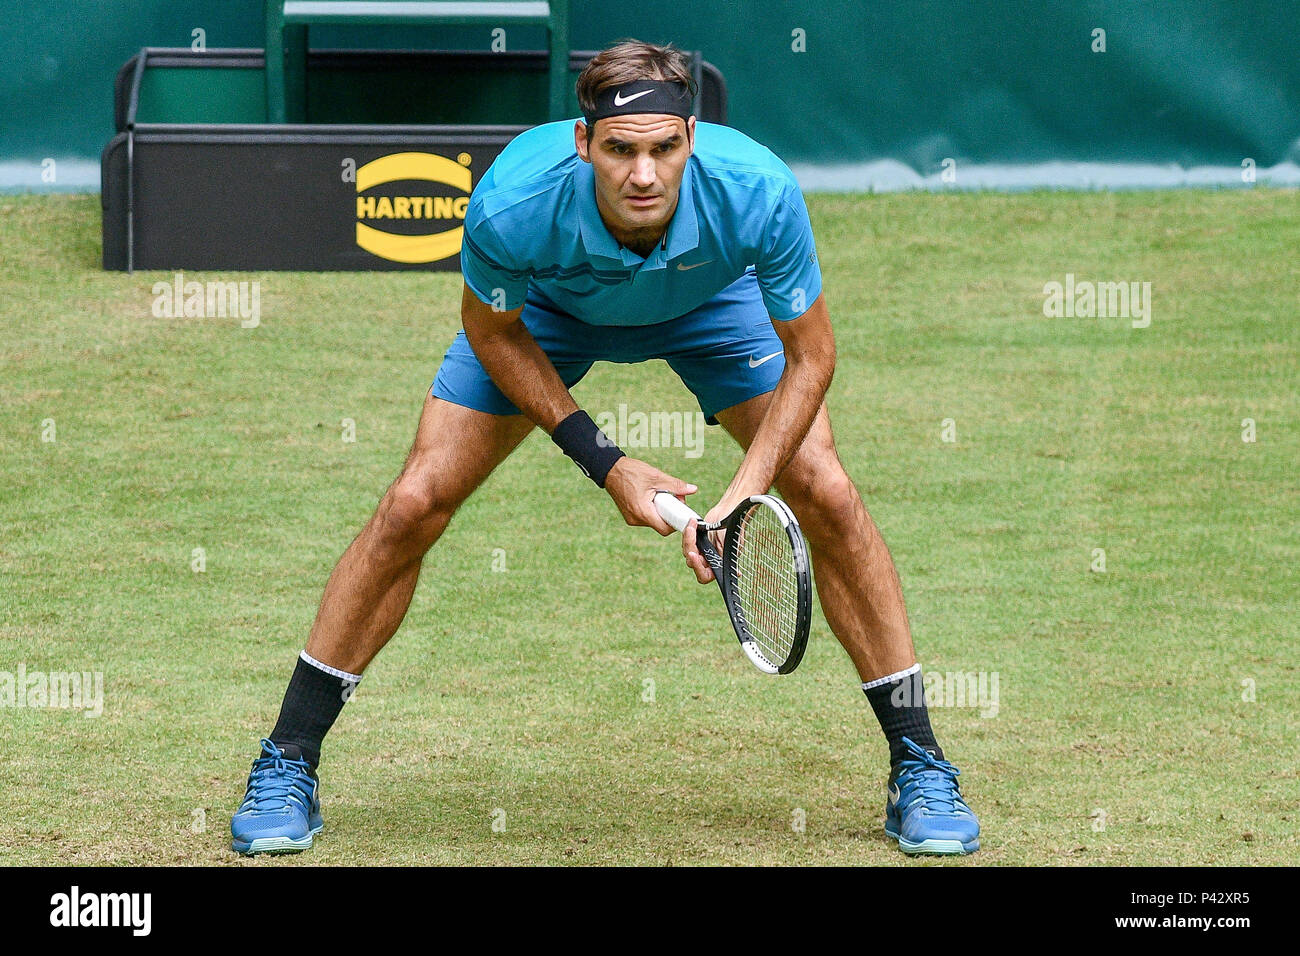 Halle, Germany. 20 June 2018 Gerry Weber Stadium, Halle/Westphalia, GER,  ATP World Tour 500 Event, 26th Gerry Weber Open 2018 from 18.-24. June,  pictured Roger Federer (SUI) waiting for the return photo